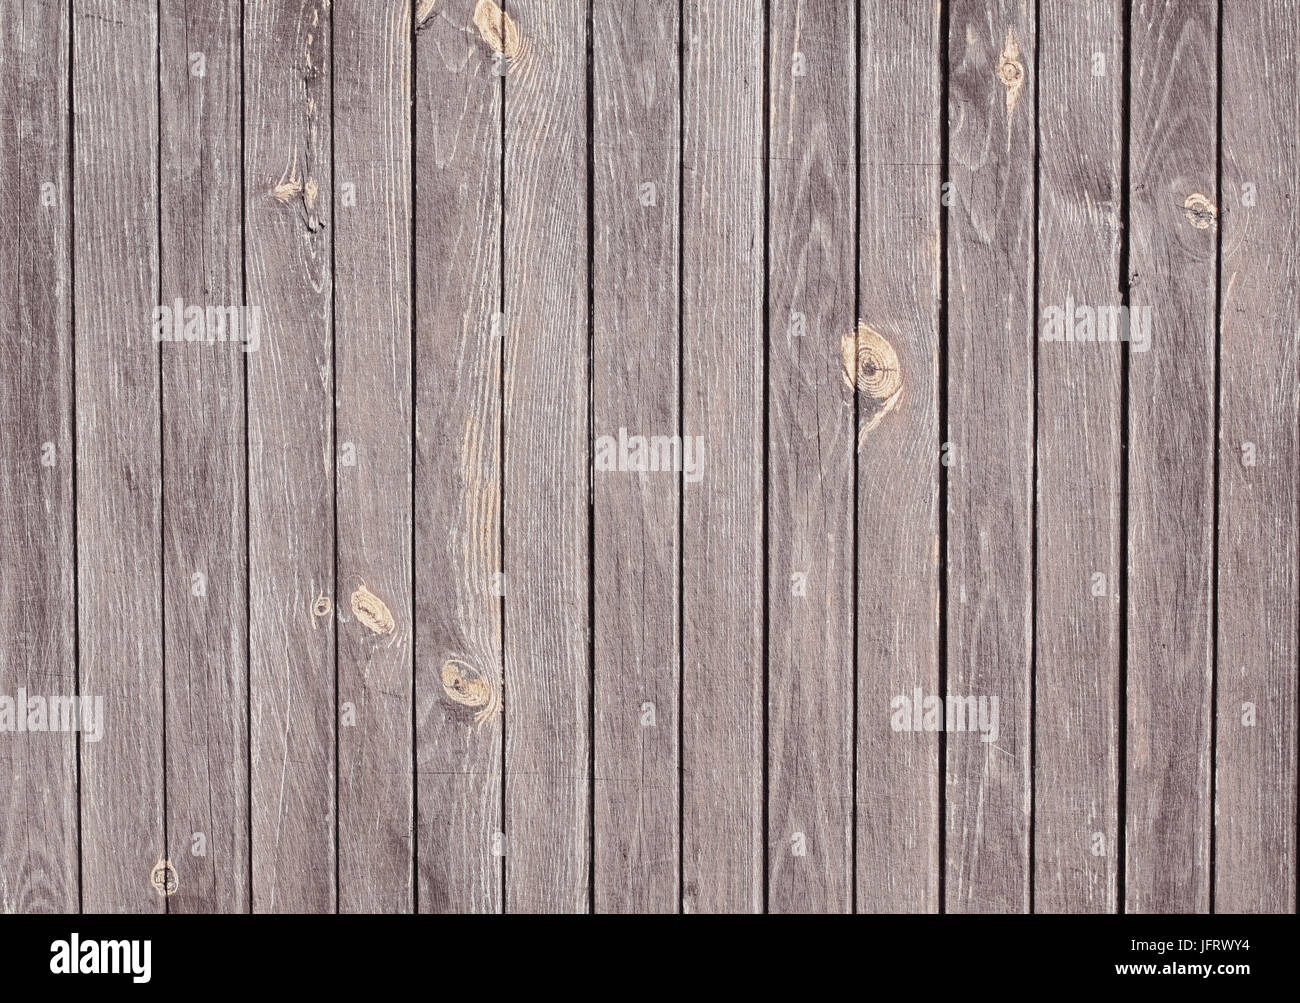 Dark wooden texture with vertical planks floor, table, wall surface. Stock Photo